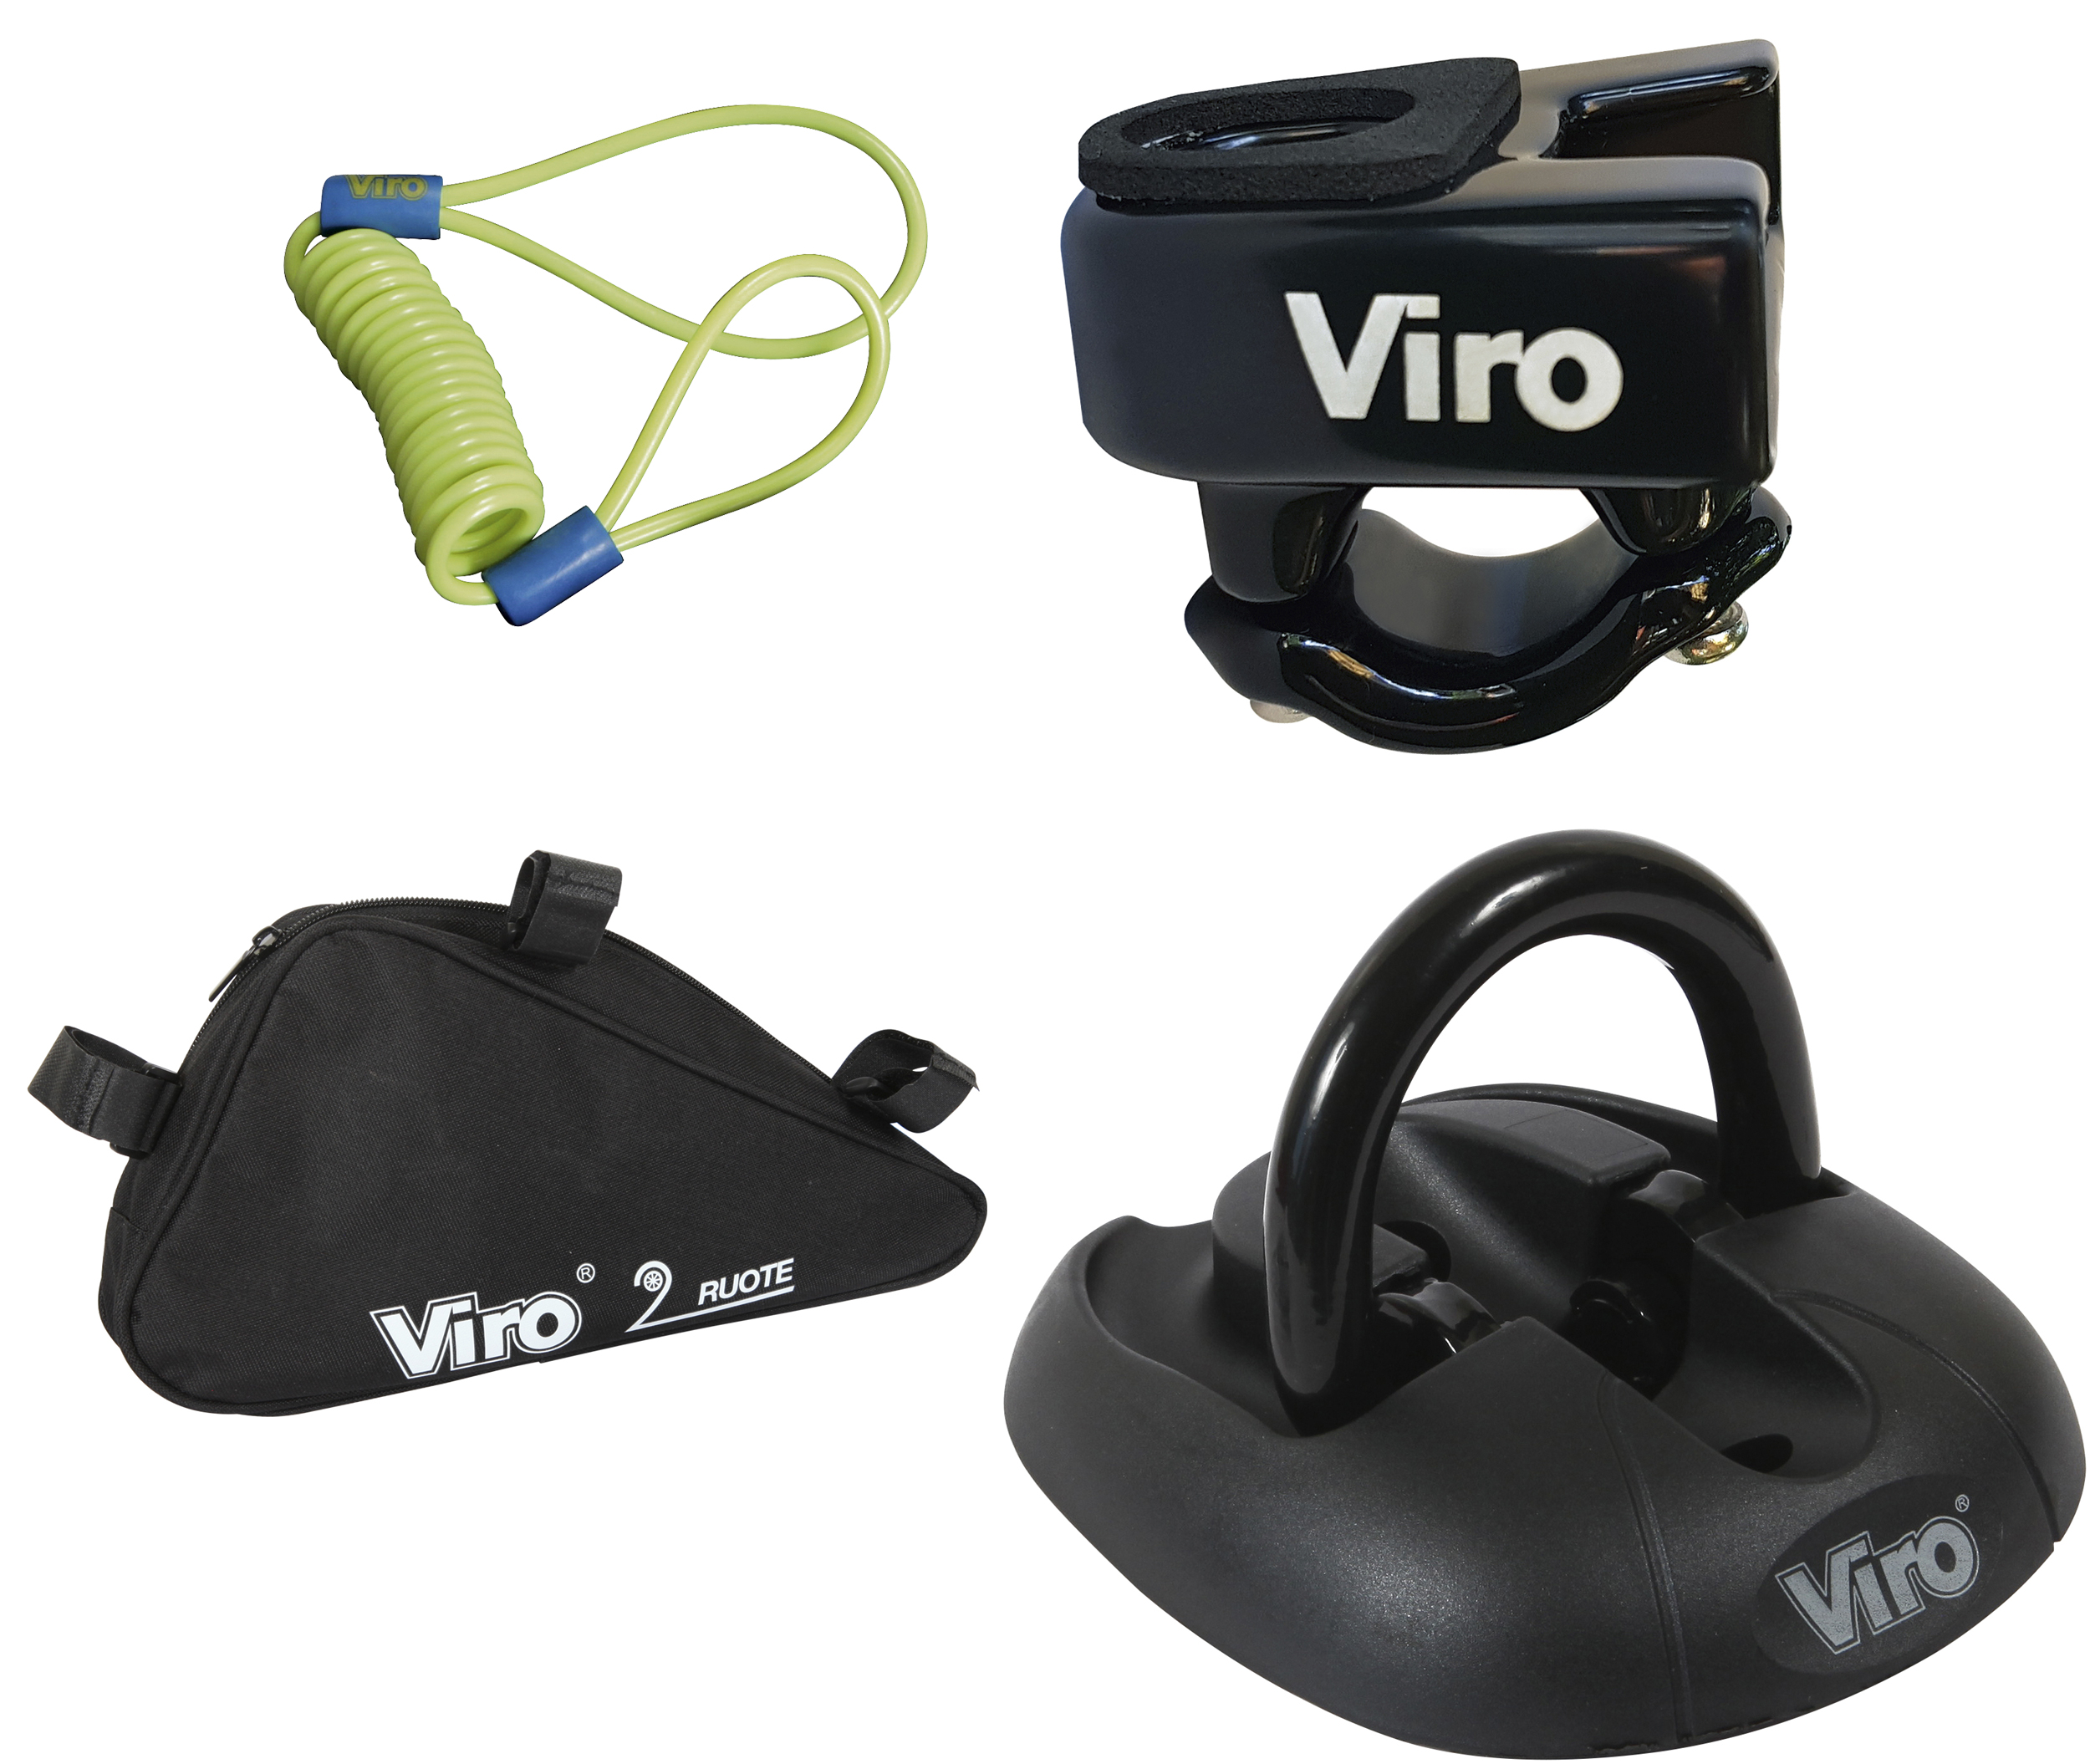 VIRO - Accessories for 2Ruote anti-theft device